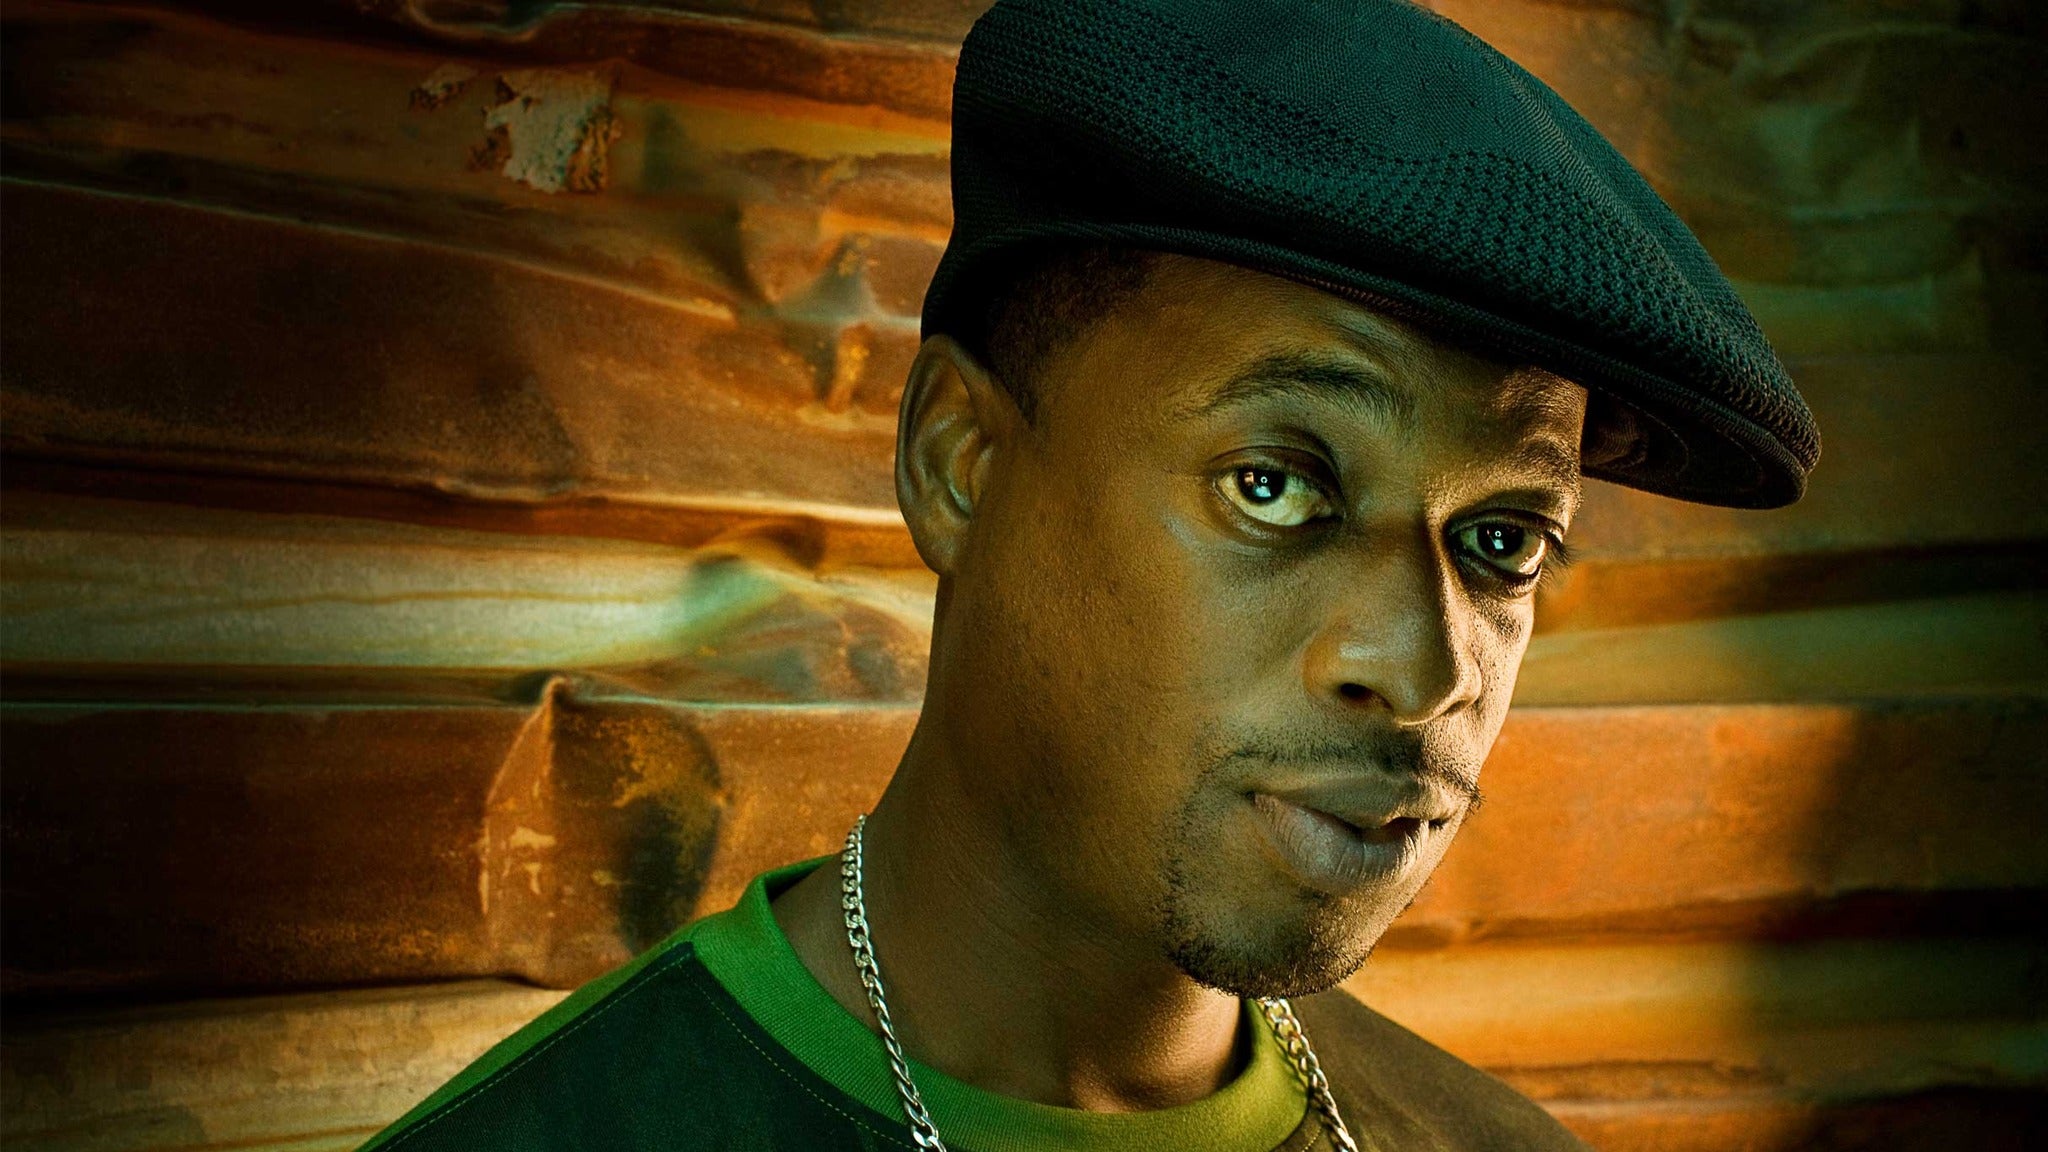 Image used with permission from Ticketmaster | Devin the Dude tickets